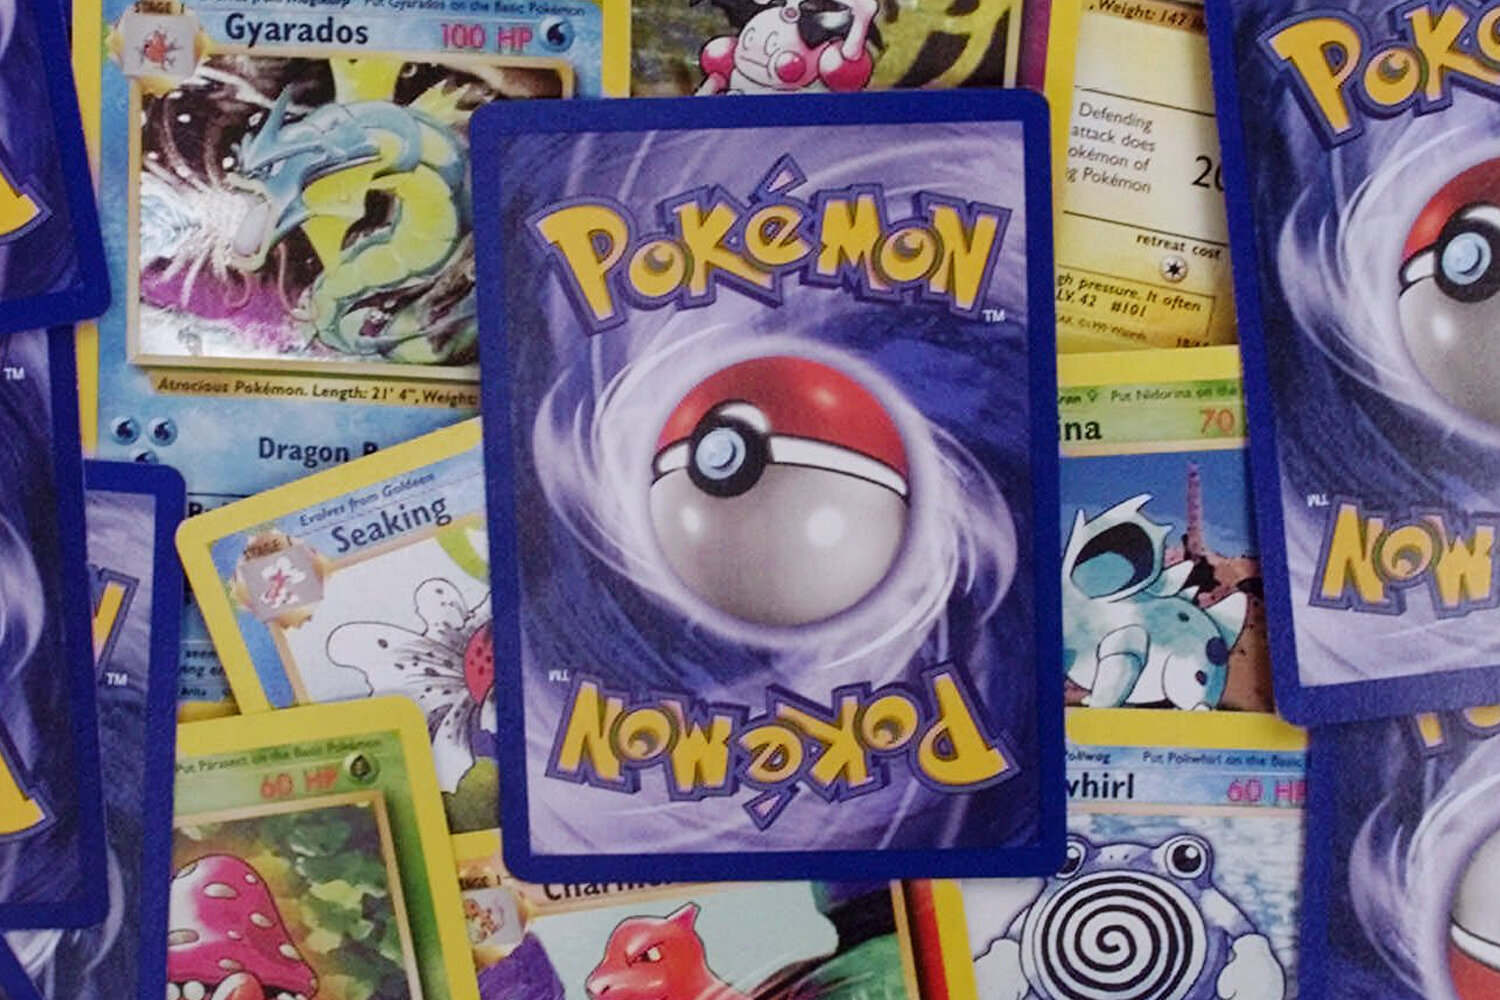 ** FILE ** In this Sept. 8, 1999 file photo, a selection of Pokemon trading cards are displayed in Scituate, Mass. (AP Photo/Charles Krupa, file)